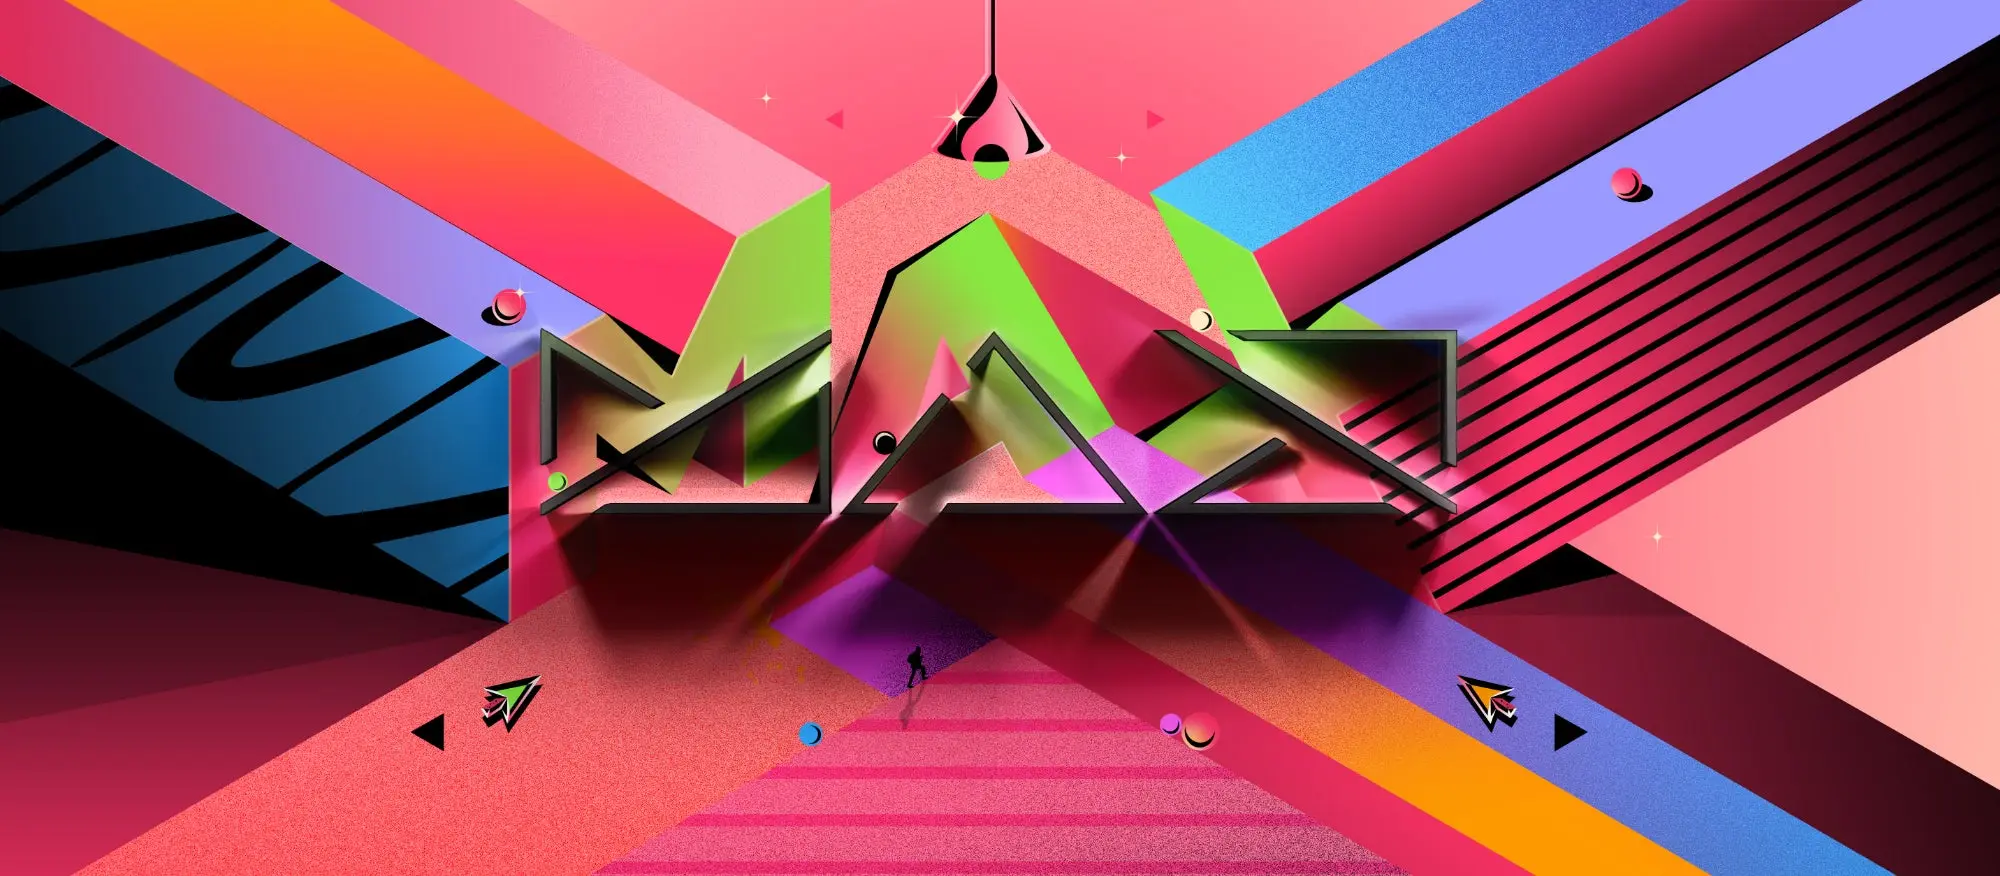 Colorful abstract art for Adobe Max. 